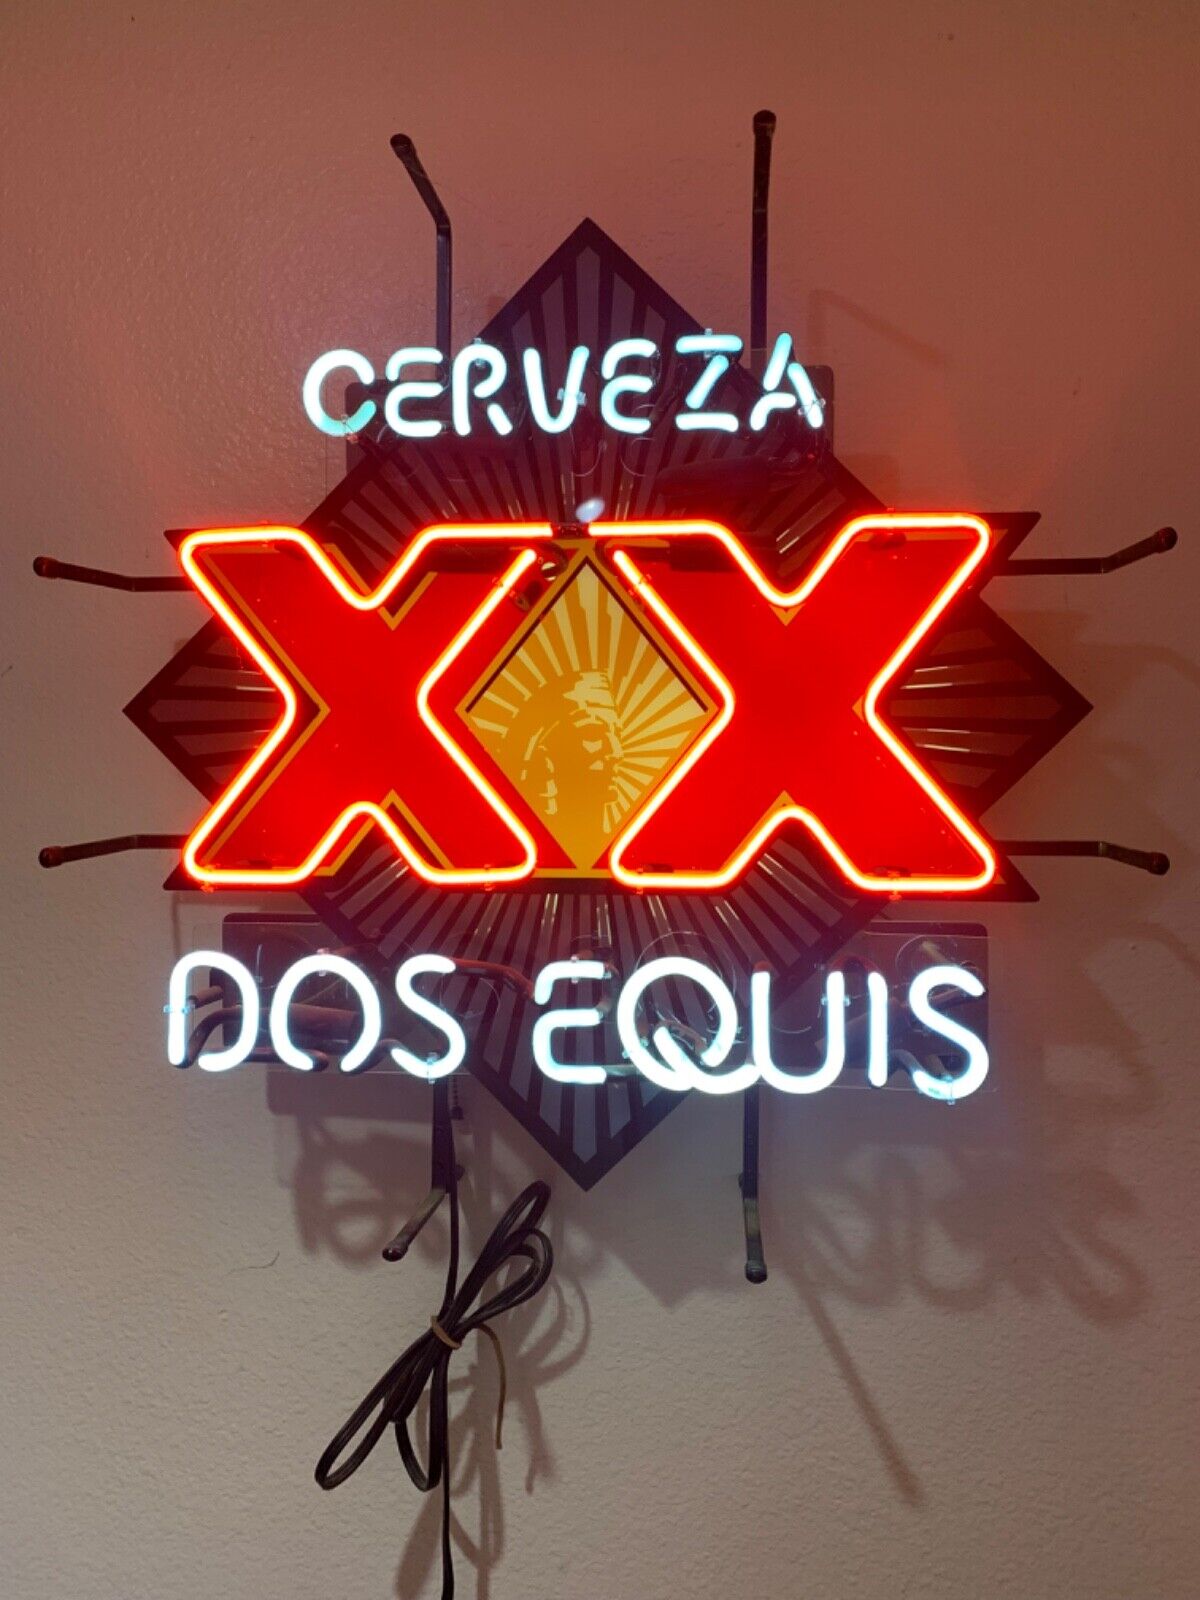 Dos Equis neon sign